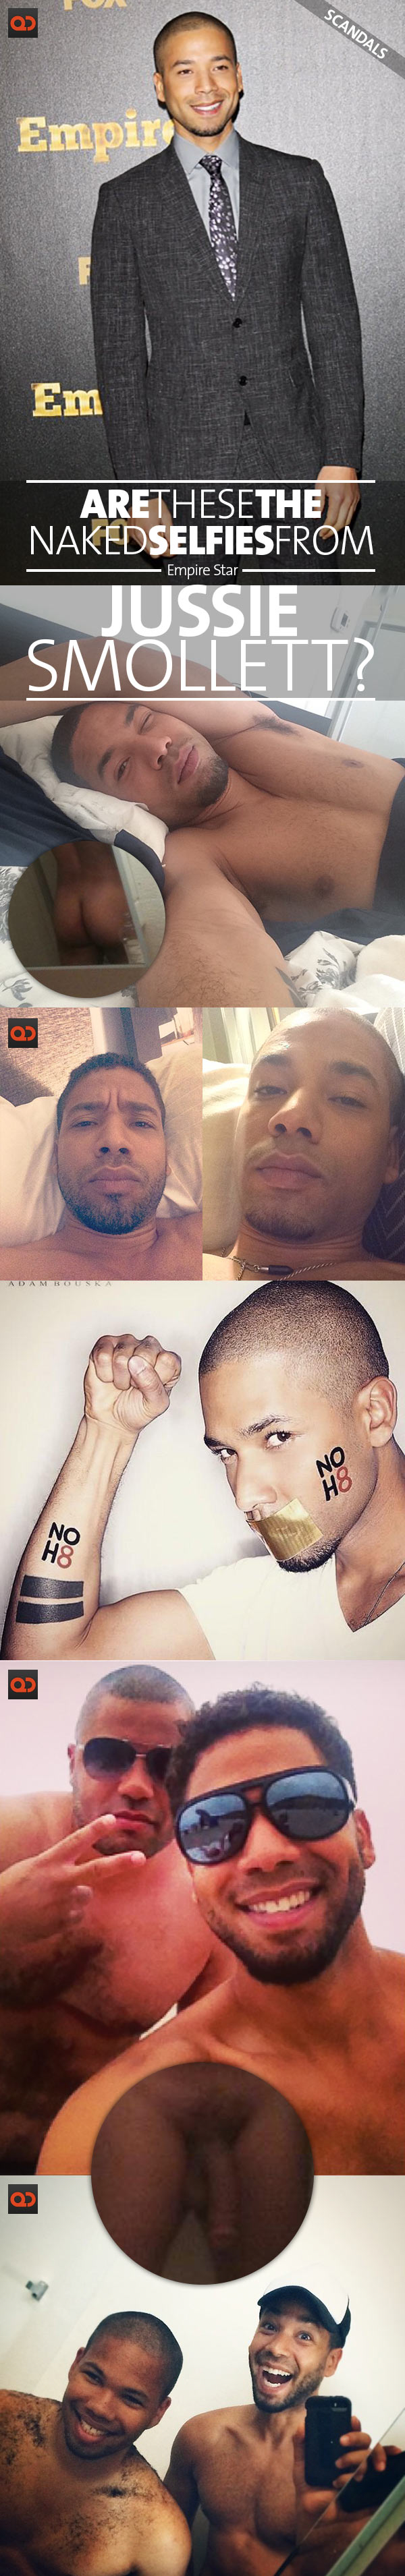 QC Scandals: Are These The Naked Selfies From Empire Star Jussie Smollett?